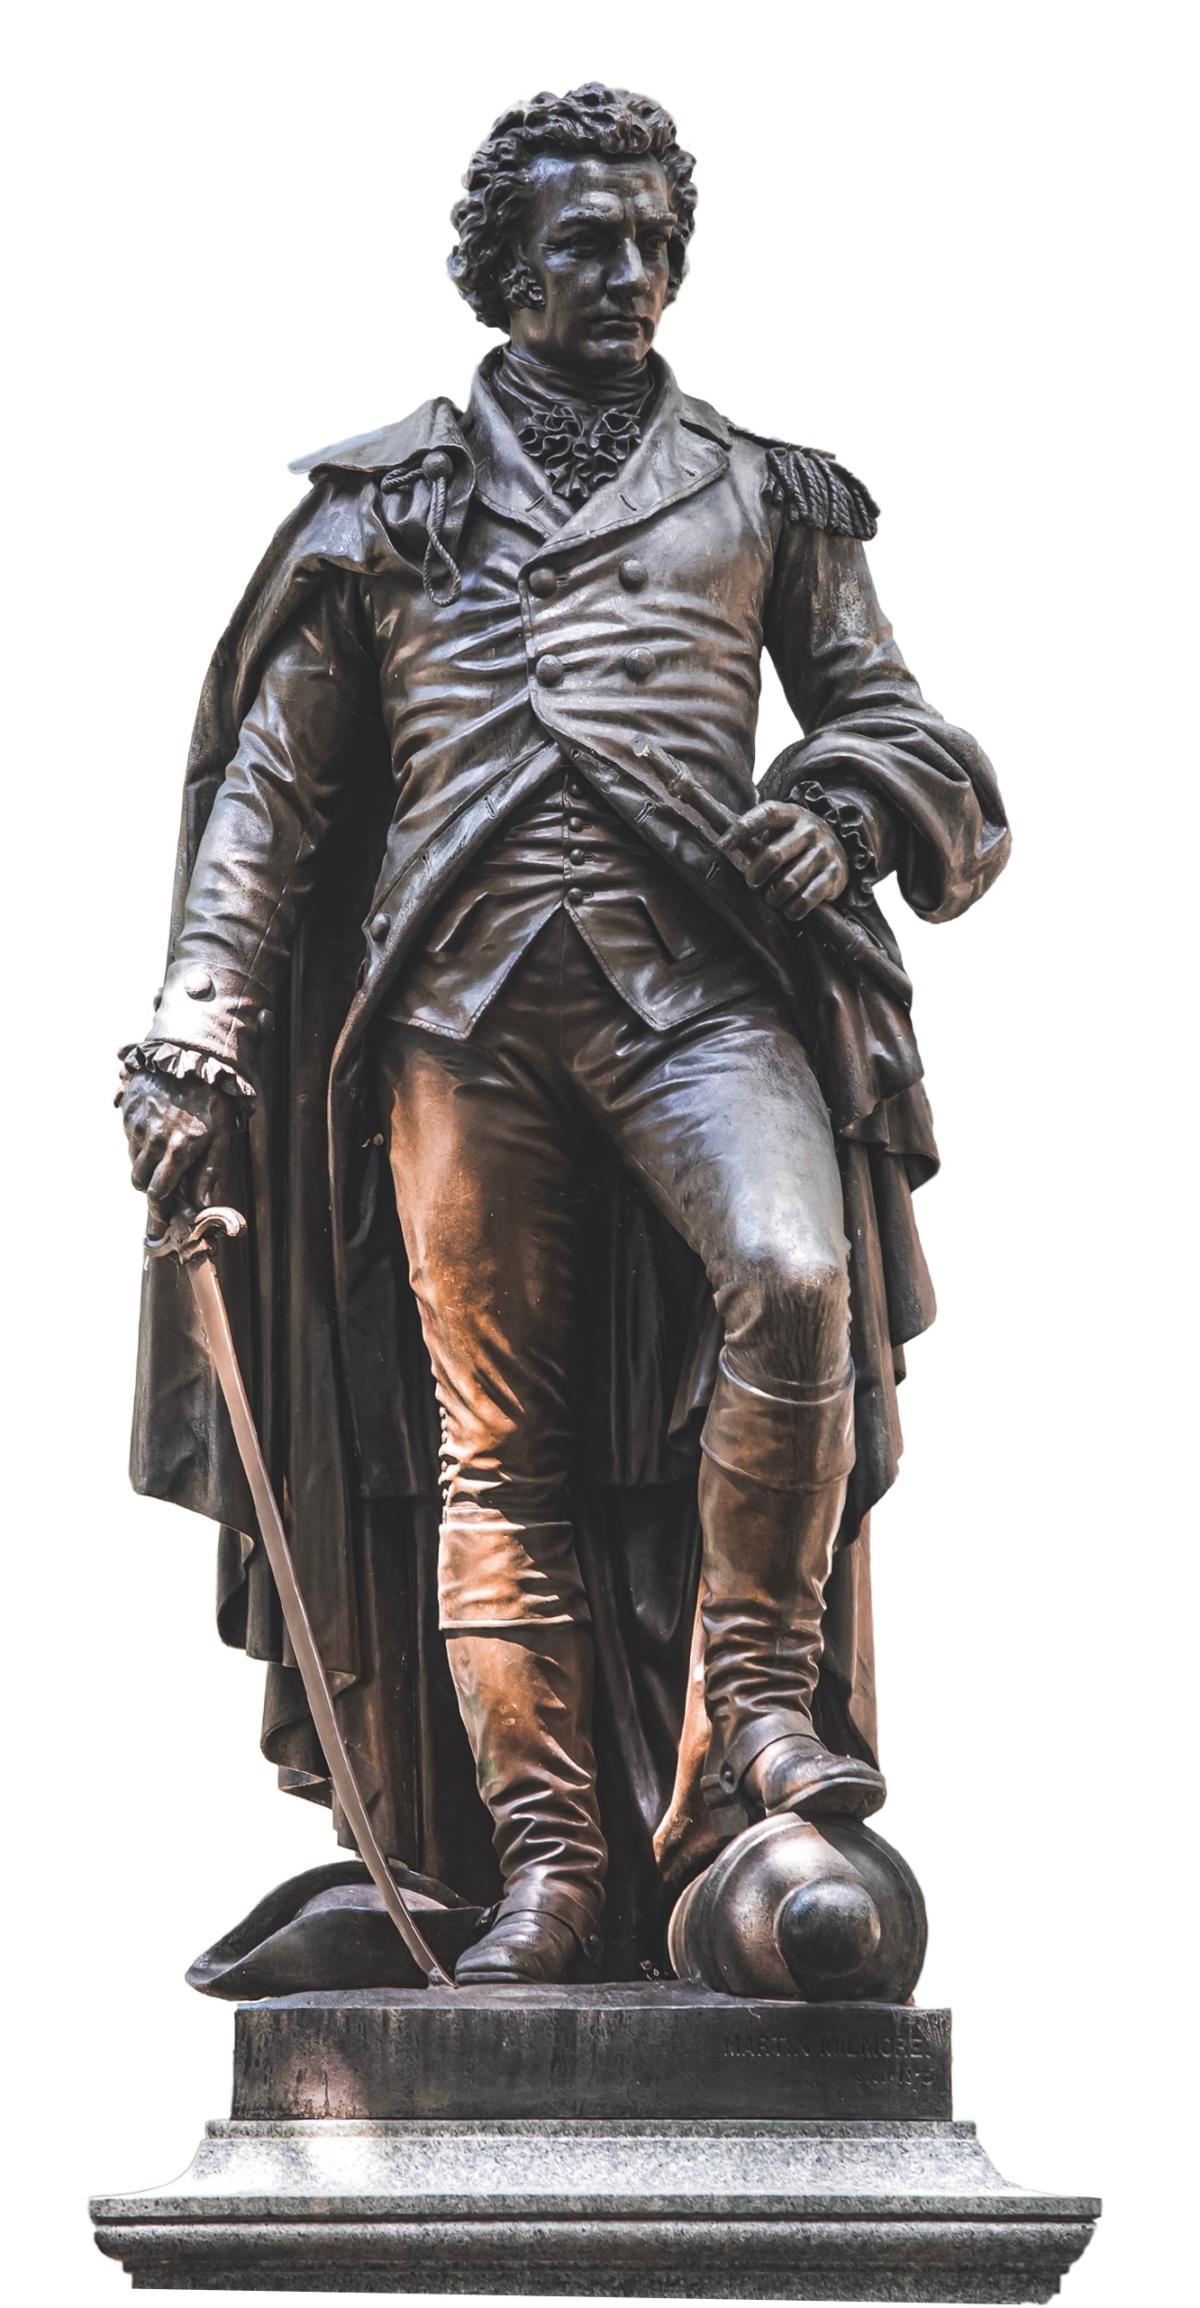 The bronze monument of Gen. John Glover by Martin Milmore was erected along the Commonwealth Avenue Mall, Boston, in 1875. (2p2play/Shutterstock)